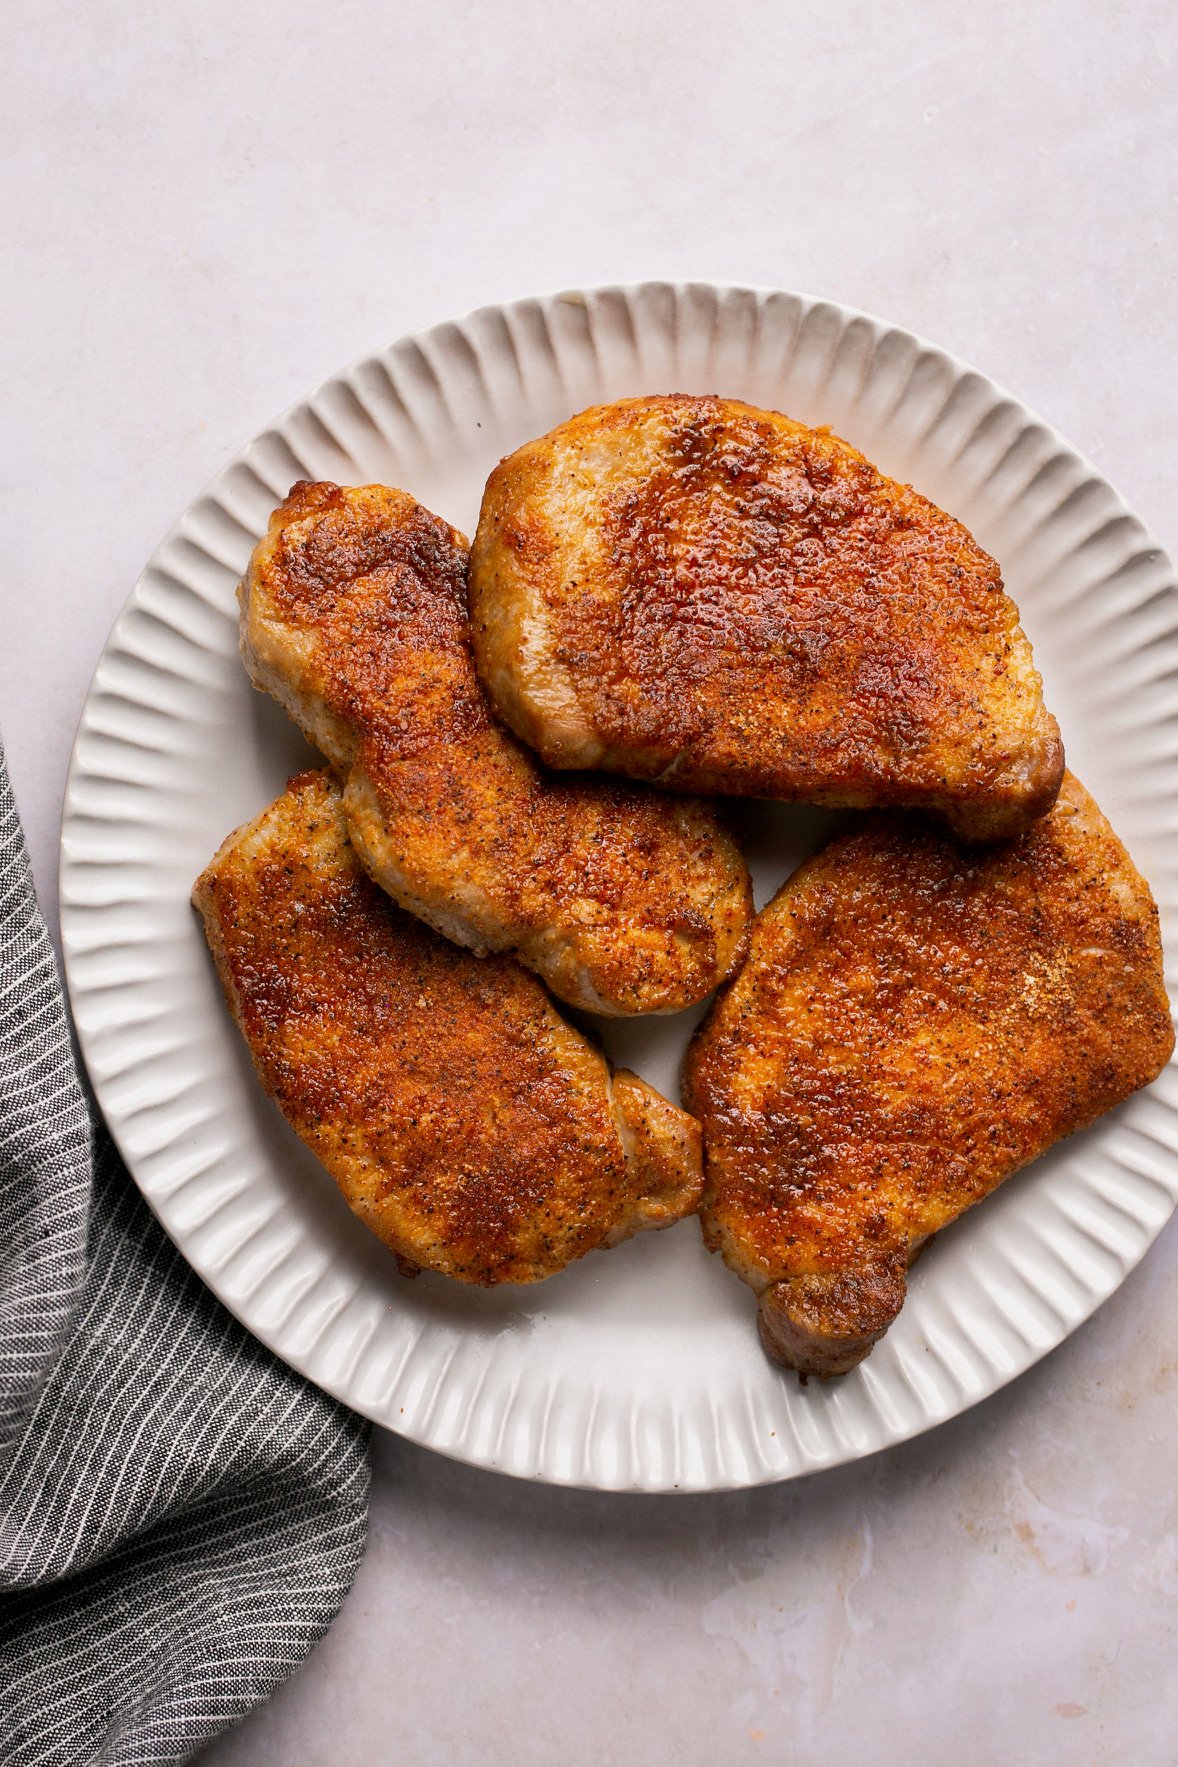 seasoned and cooked pork chops stacked on a white plate